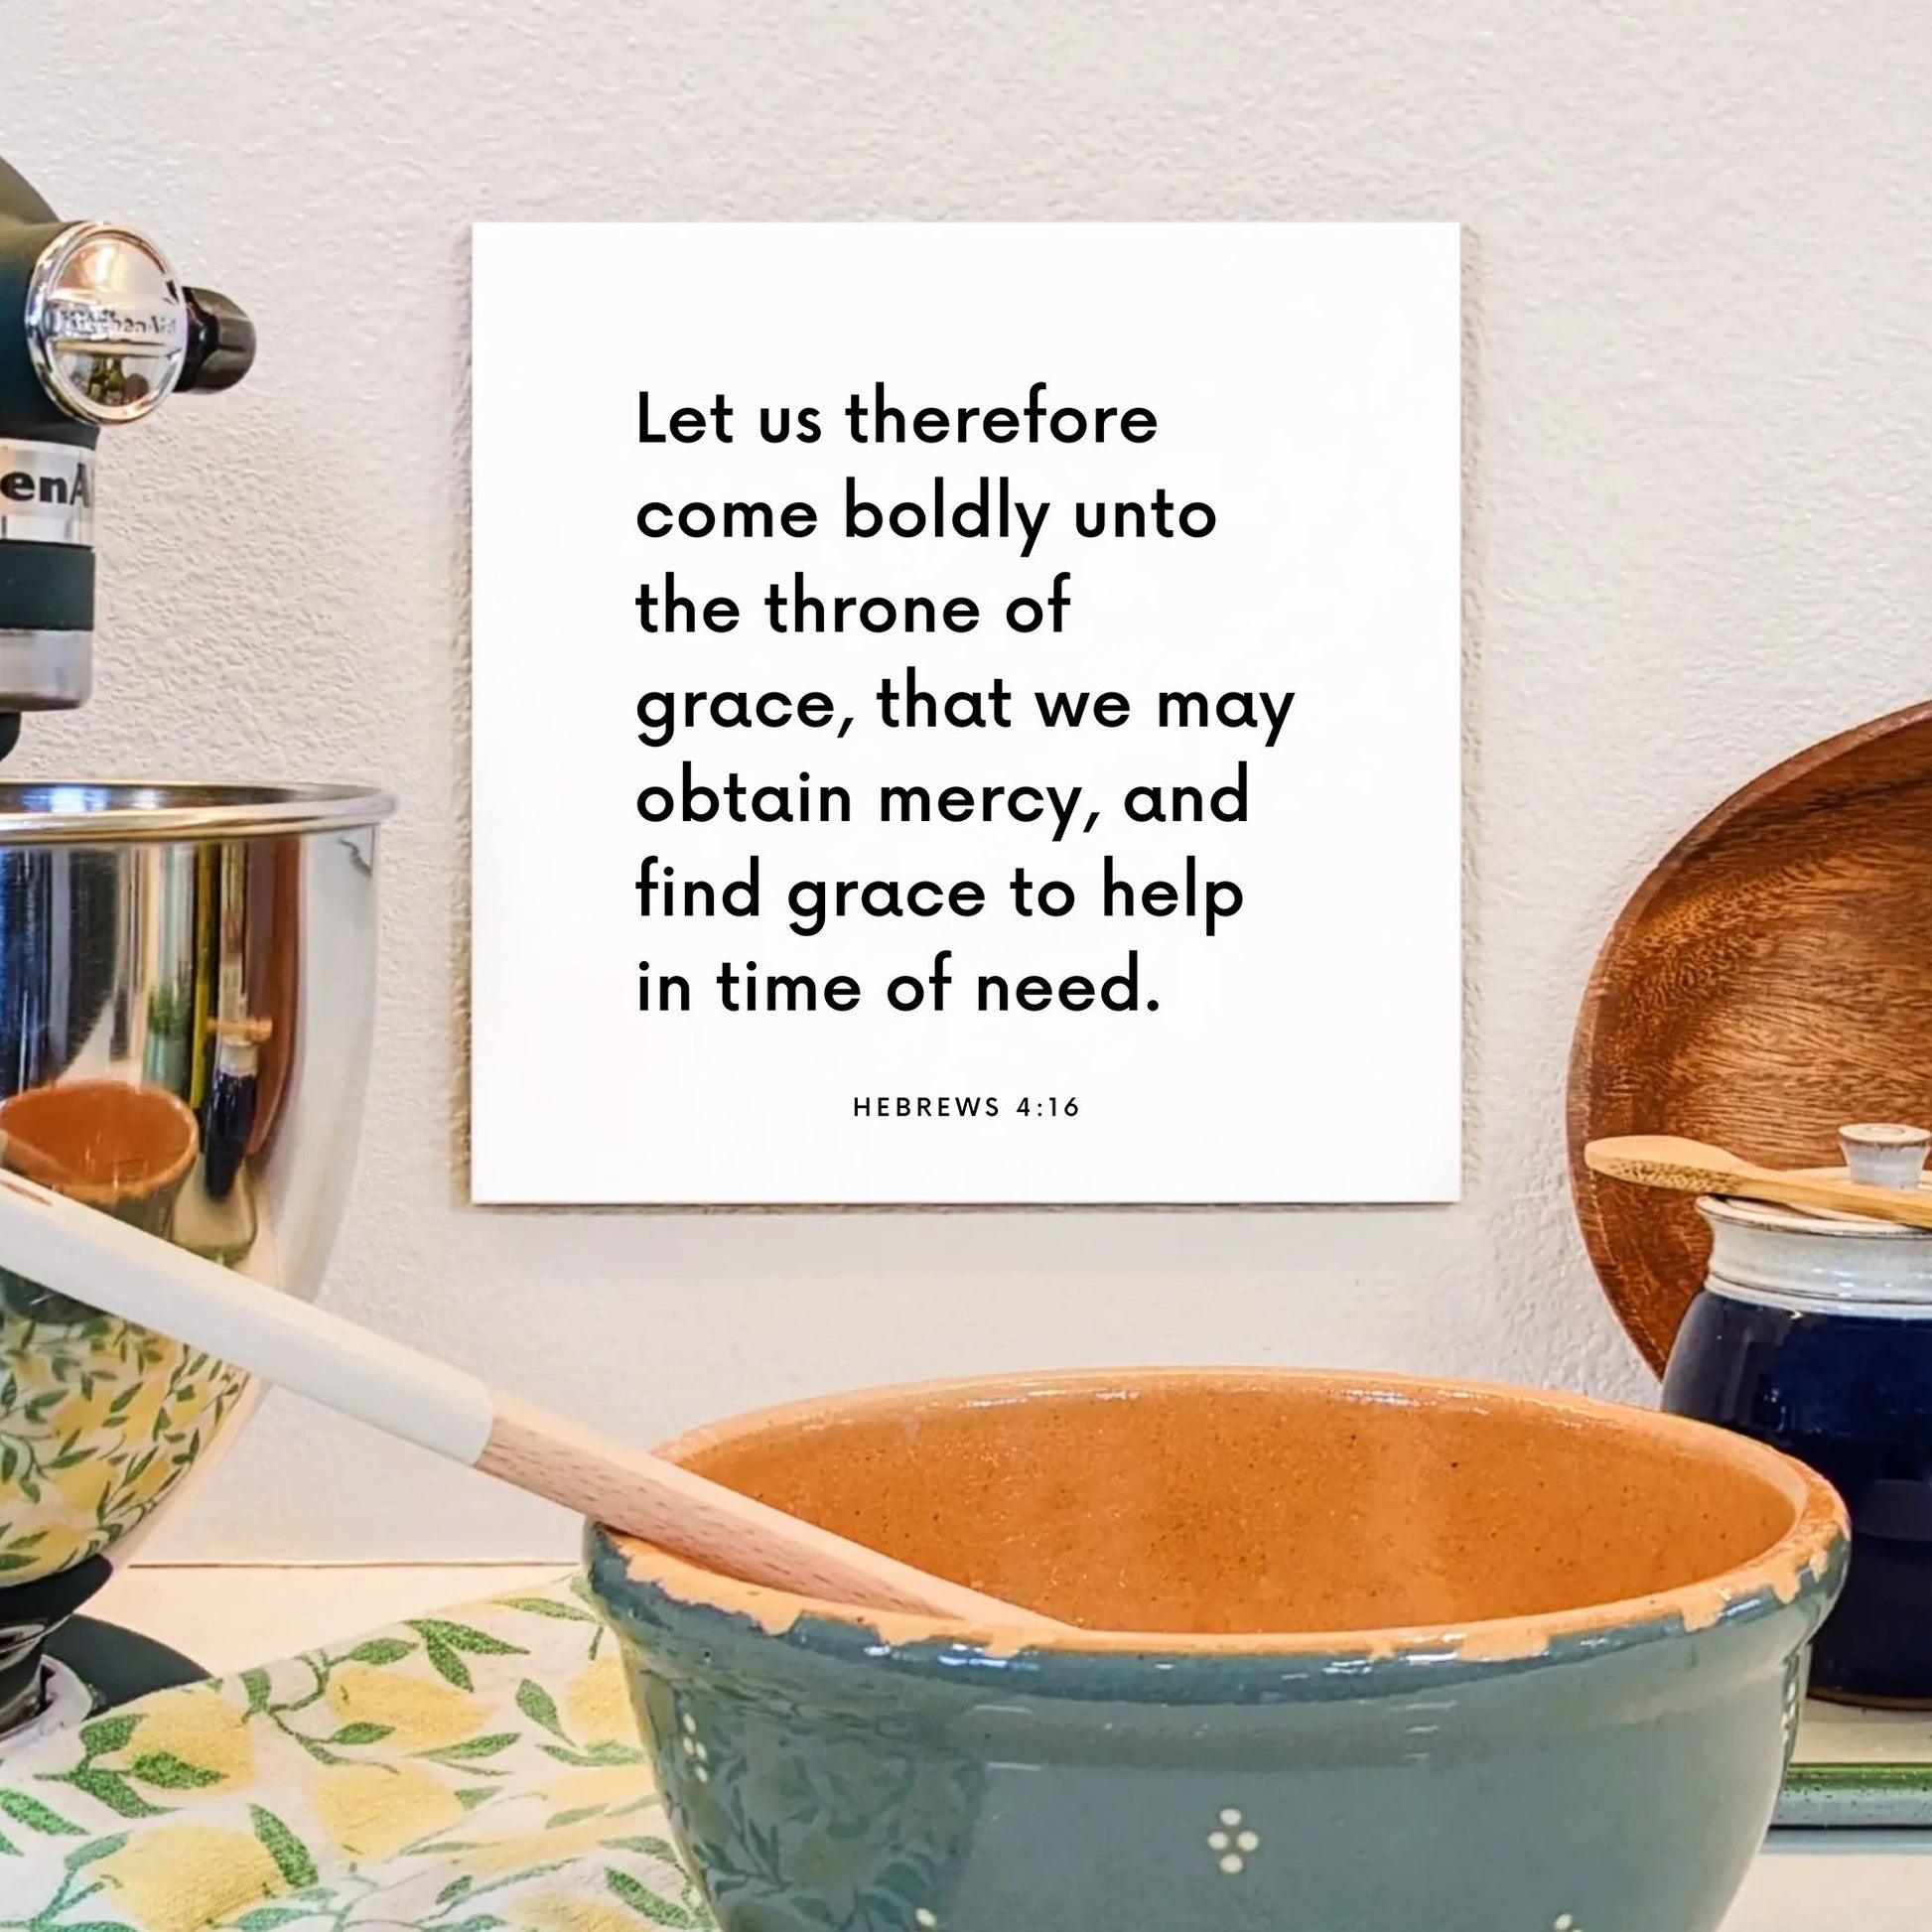 Kitchen mouting of the scripture tile for Hebrews 4:16 - "Let us therefore come boldly unto the throne of grace"